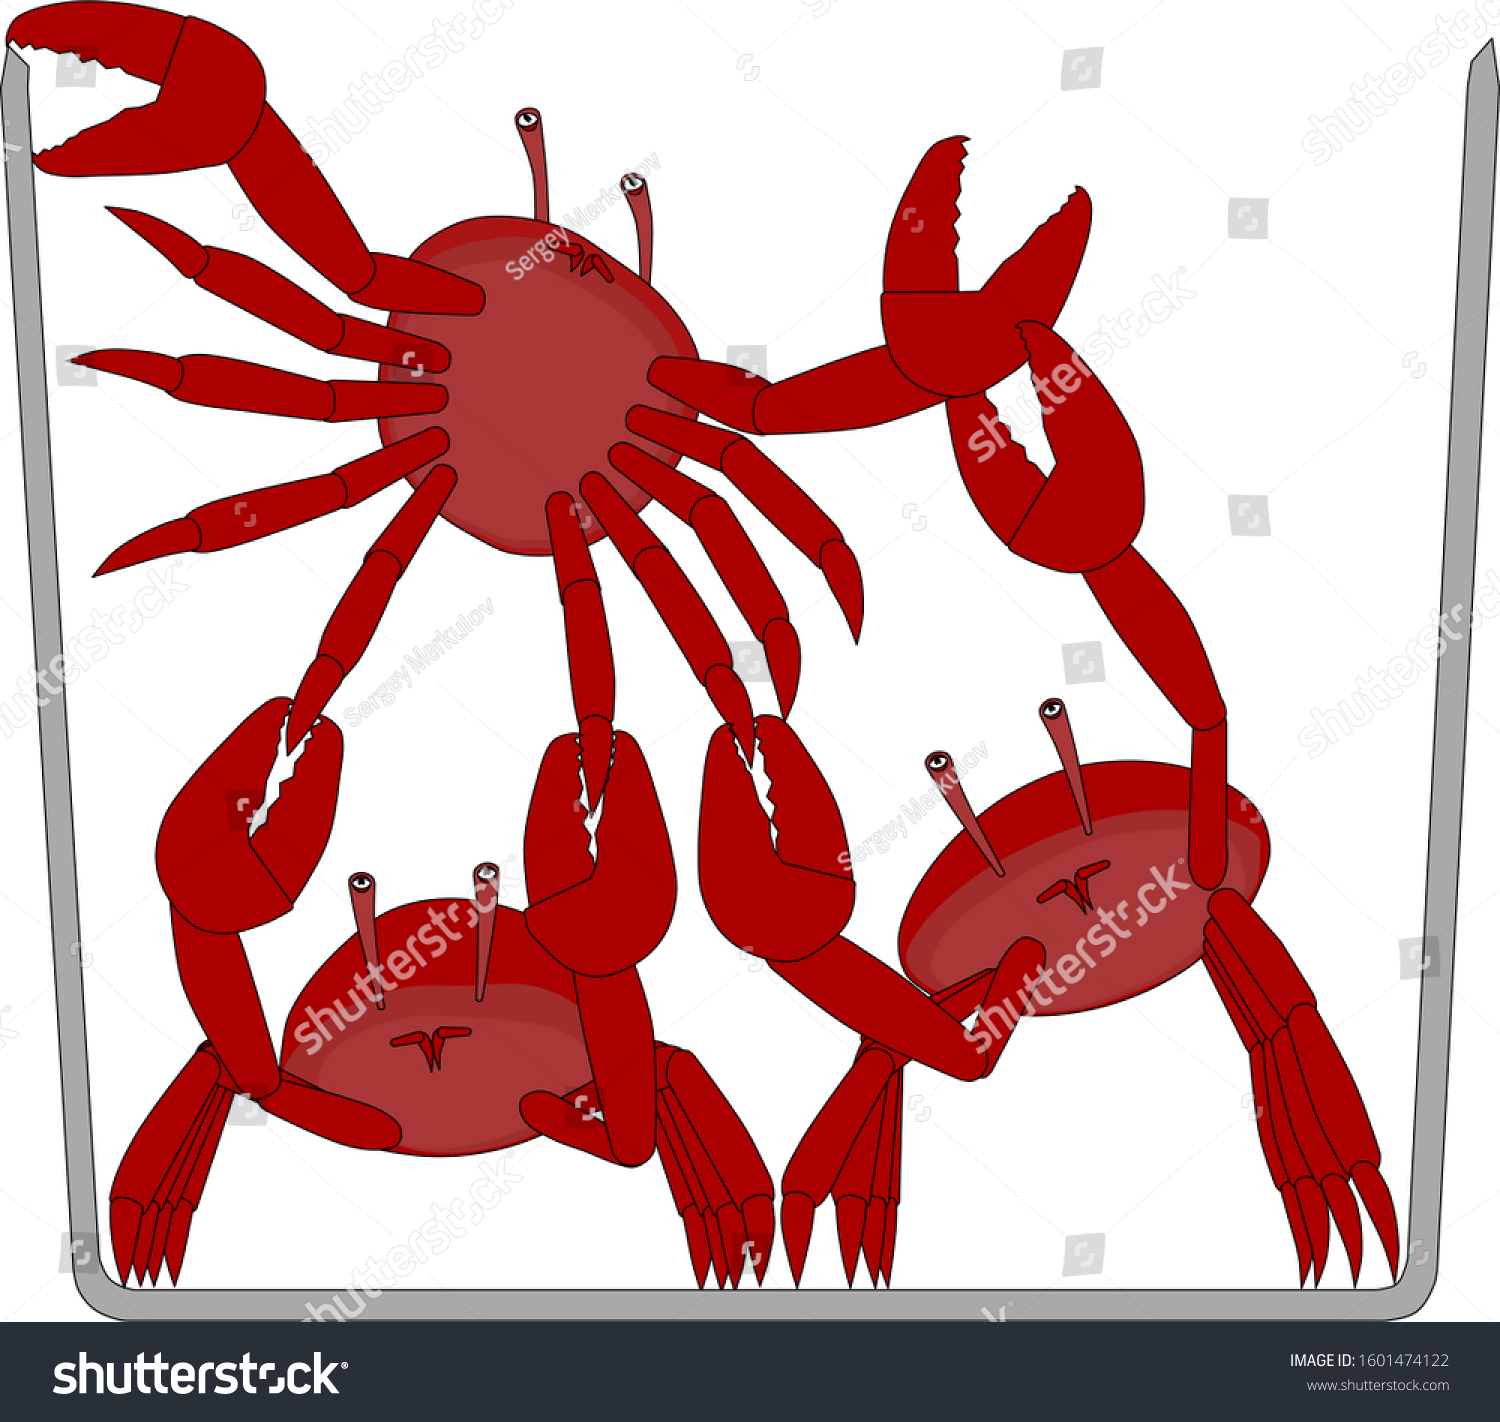 SVG of Crabs in a bucket with crab mentality svg